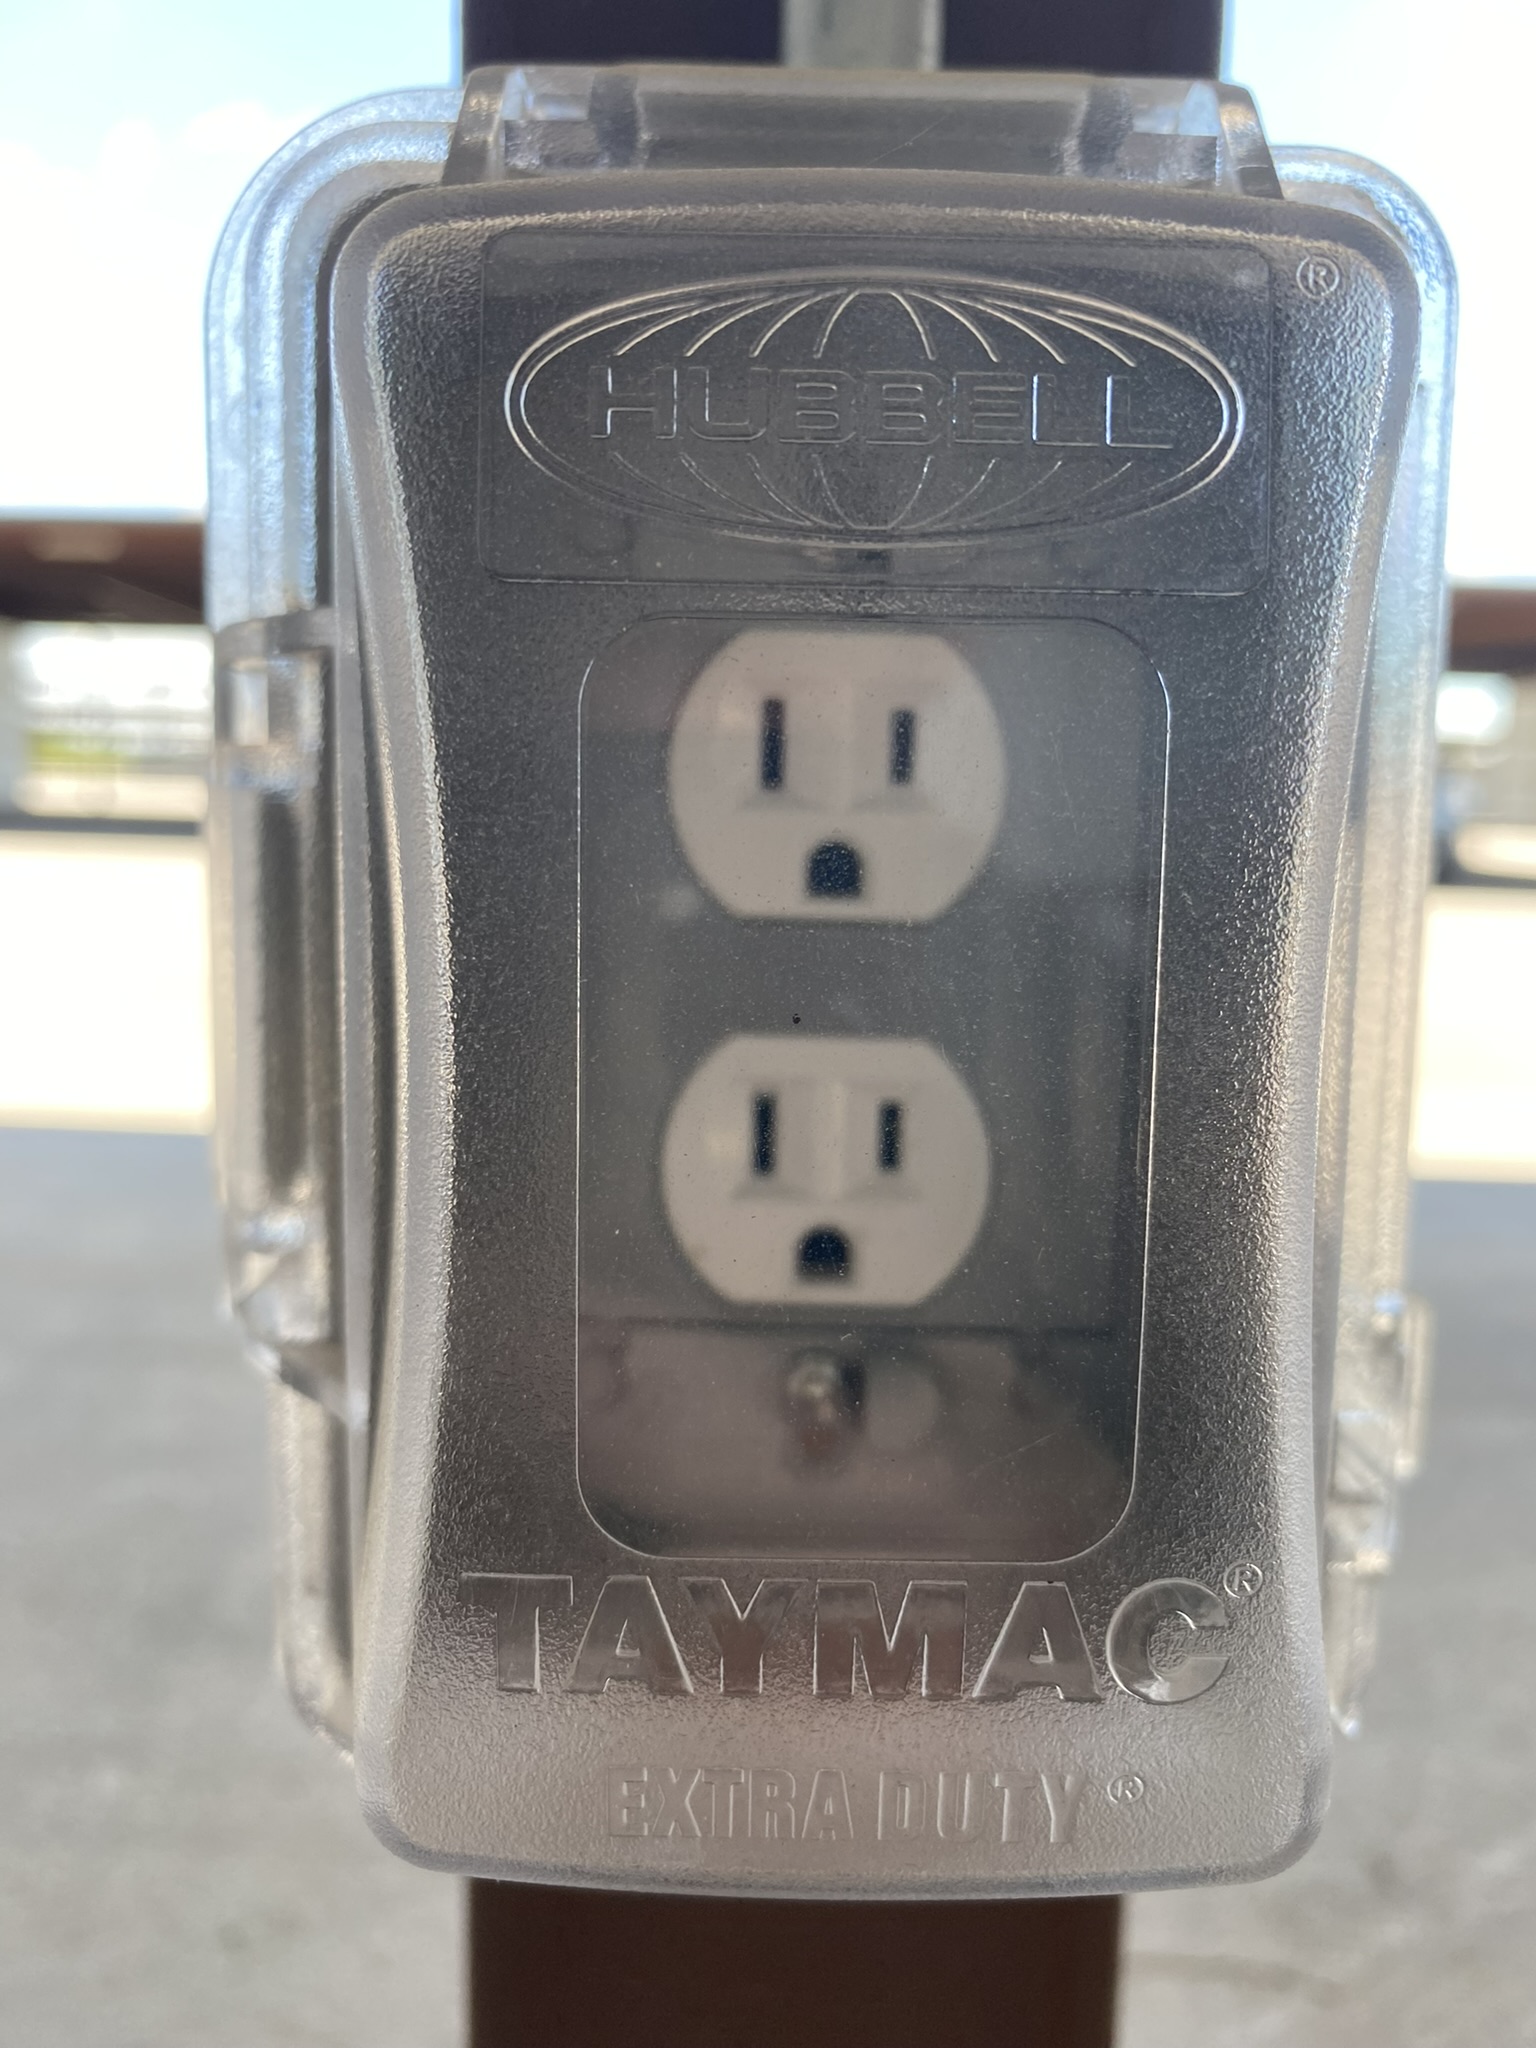 20 amp plugs at each spot